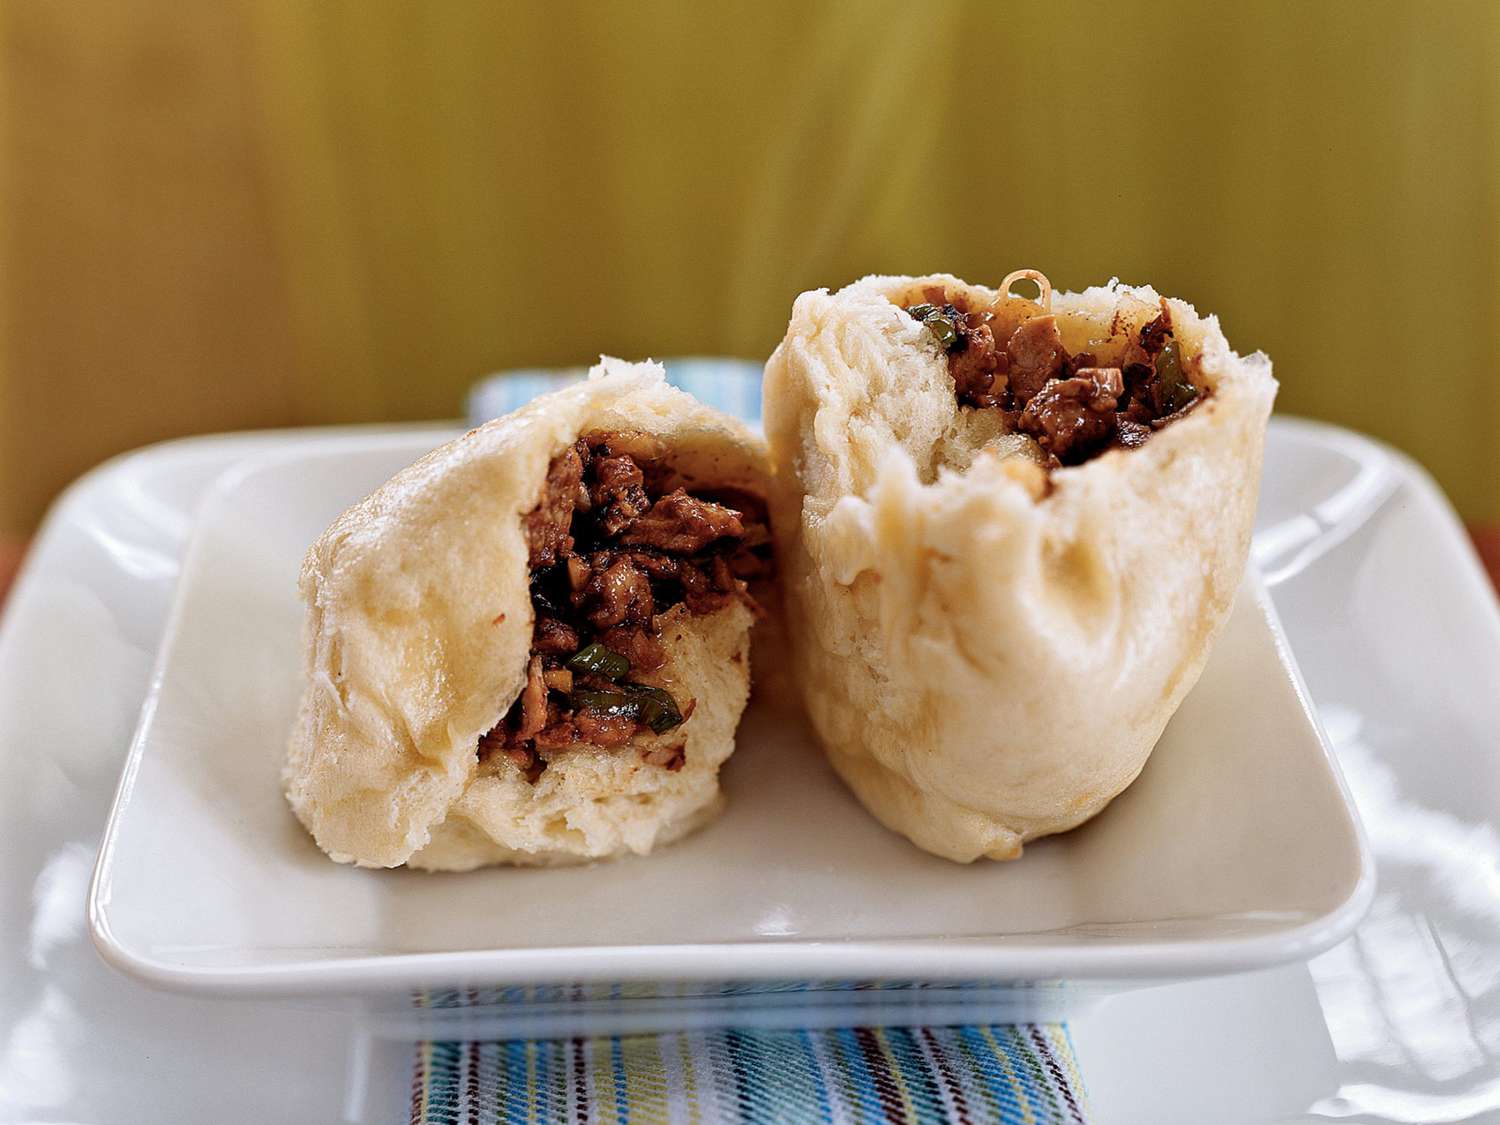 How To Make Steam Buns Without A Steamer